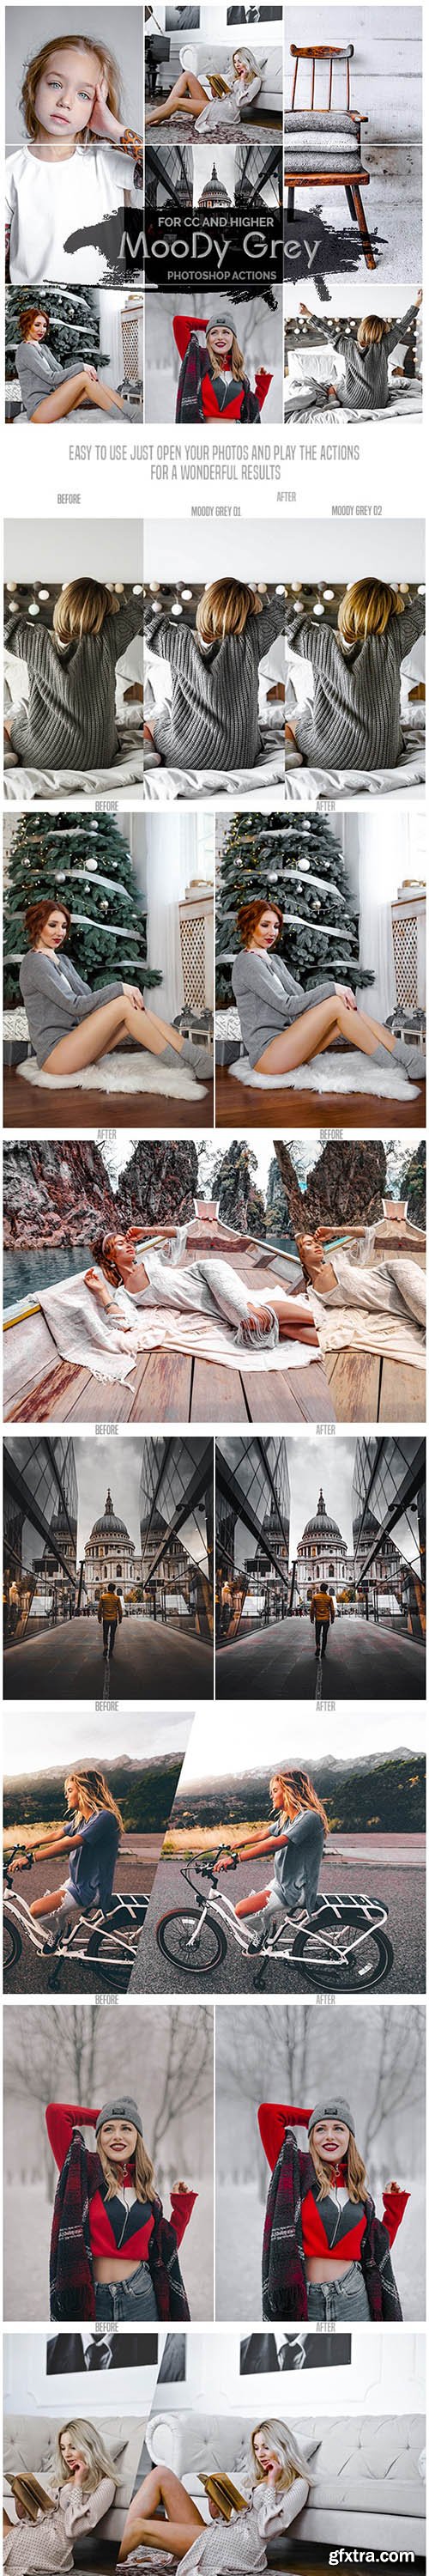 GraphicRiver - Moody Grey - Photoshop Actions 26243850